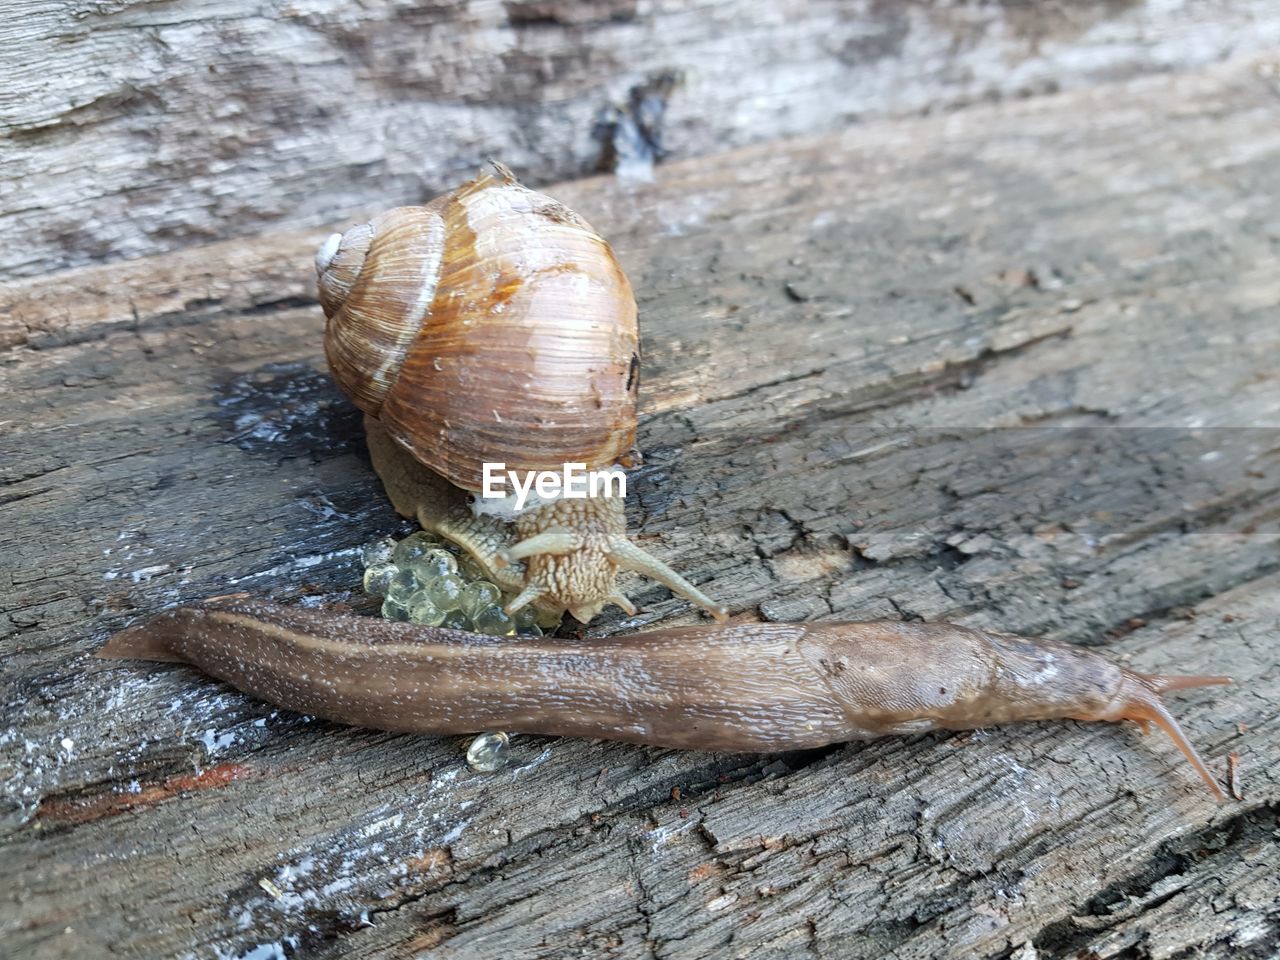 CLOSE-UP OF SNAILS ON WOOD